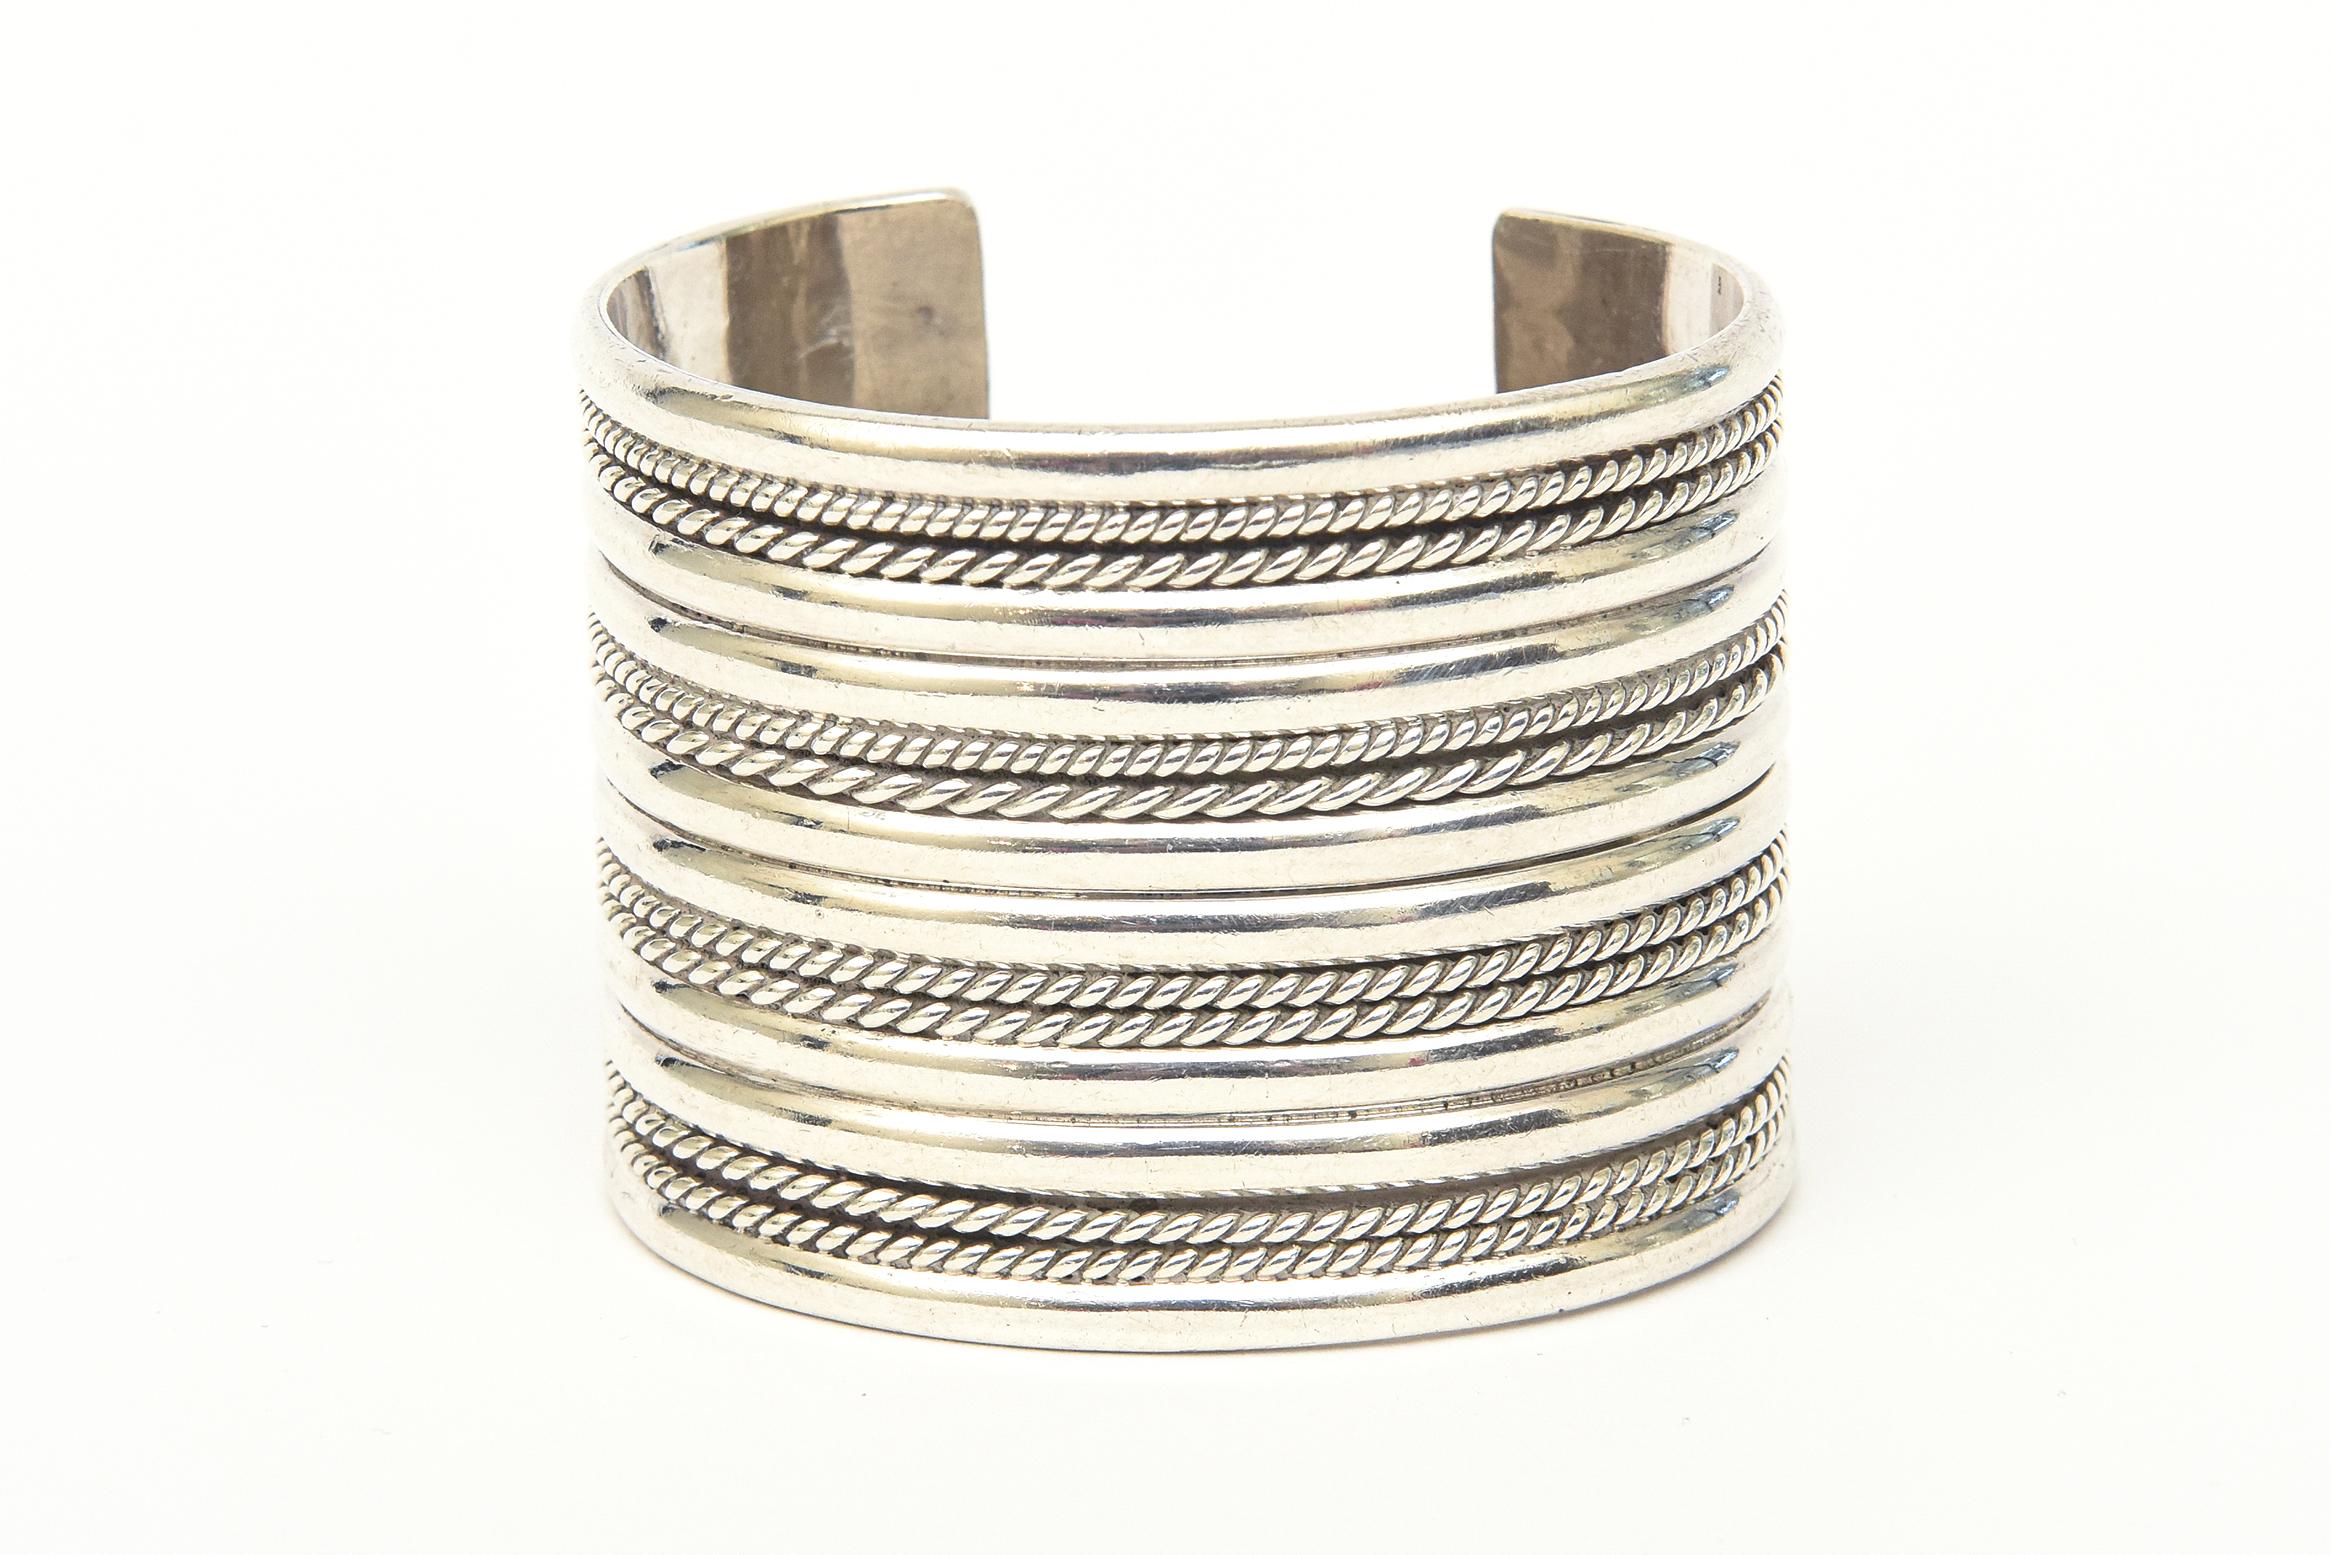 This absolutely stunning and hefty hallmarked vintage sterling silver wide cuff bracelet is a knock out. It has 4 lines / rows of angled ribbed textural designs. It is heavy gage and our favorite piece now to our collection. This is show stopper on